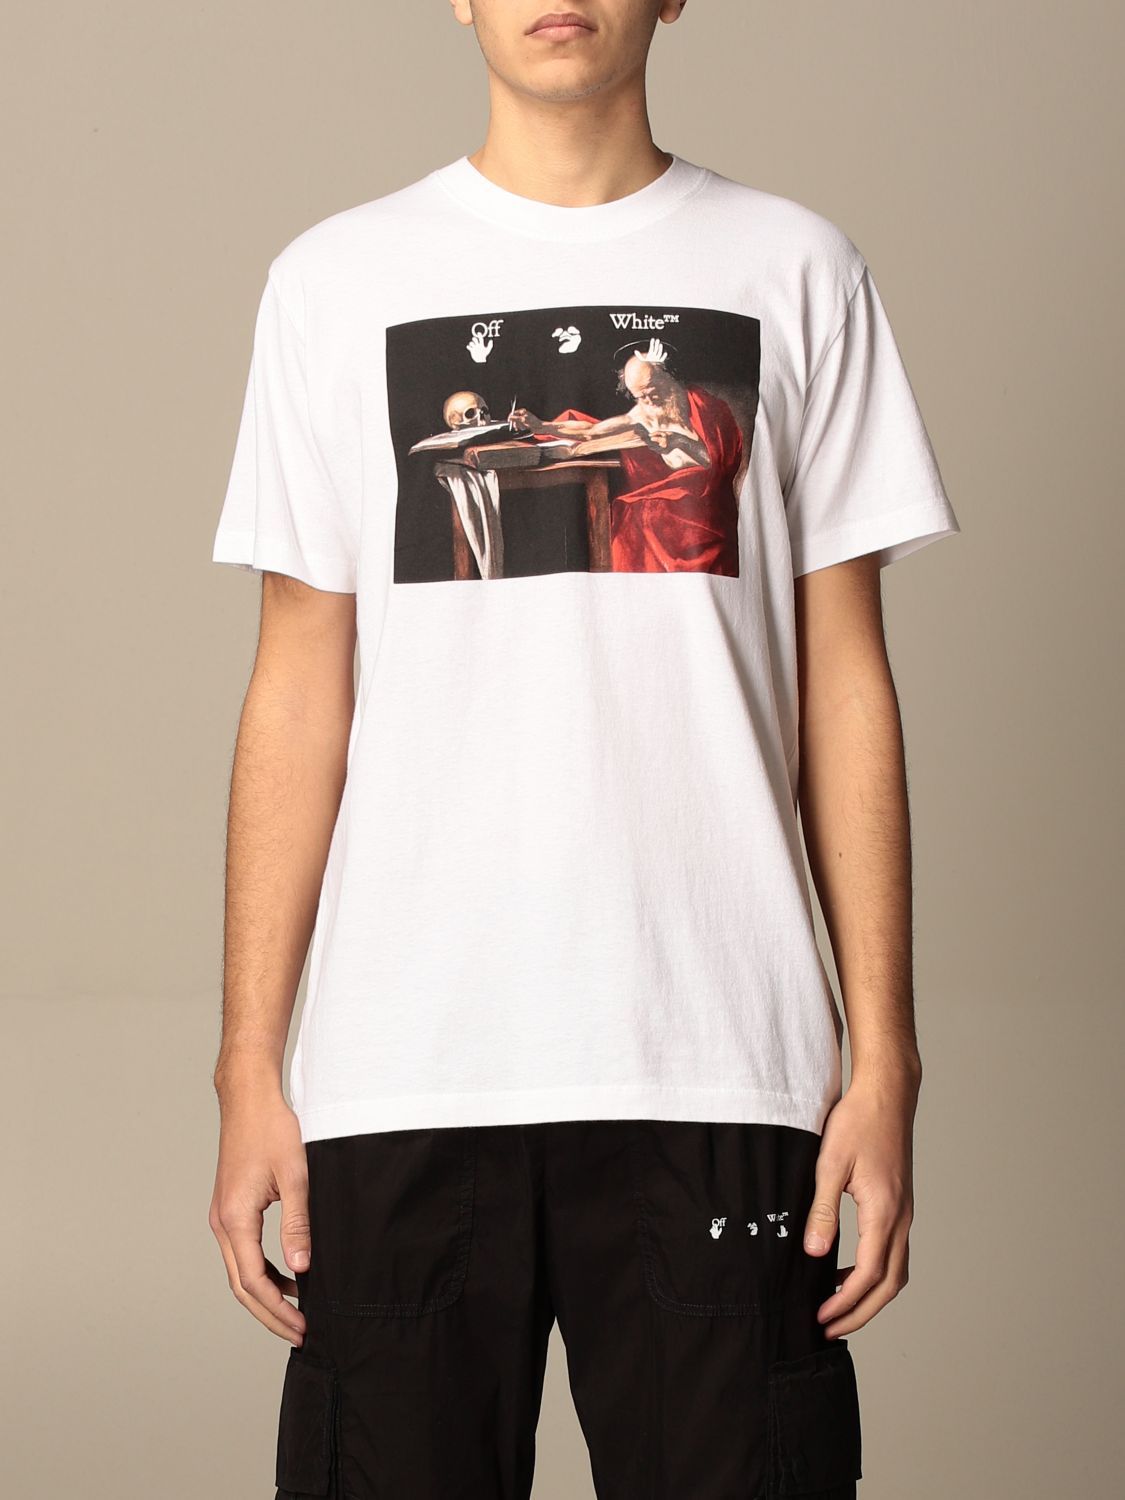 OFF-WHITE: Off White White OMAA027R21JER004 at shirt | online logo cotton with back Off-White t-shirt - t